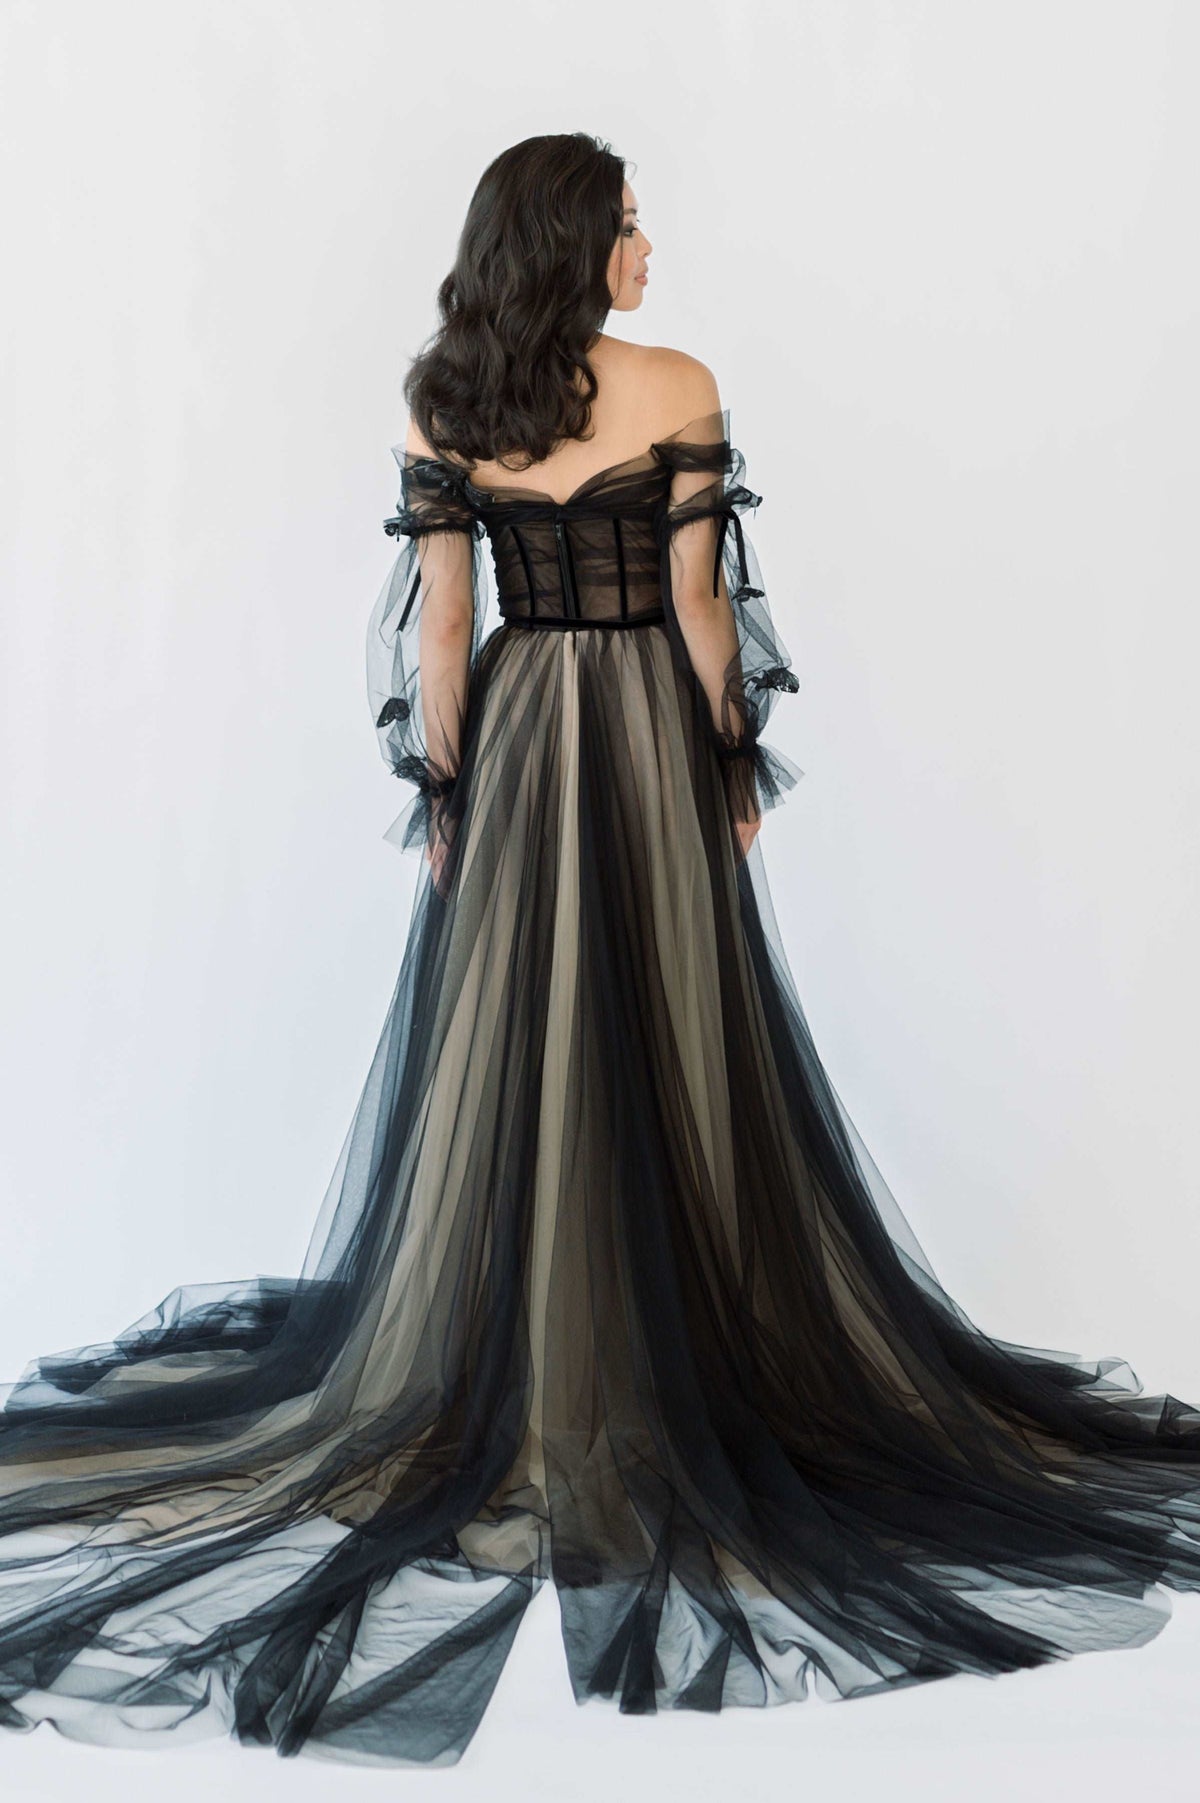 Dramatic black tulle wedding dress. Goth chic with a hint of whimsy. Unique wedding dress for unconventional brides. custom made wedding dress by Catherine Langlois, Toronto, Canada.